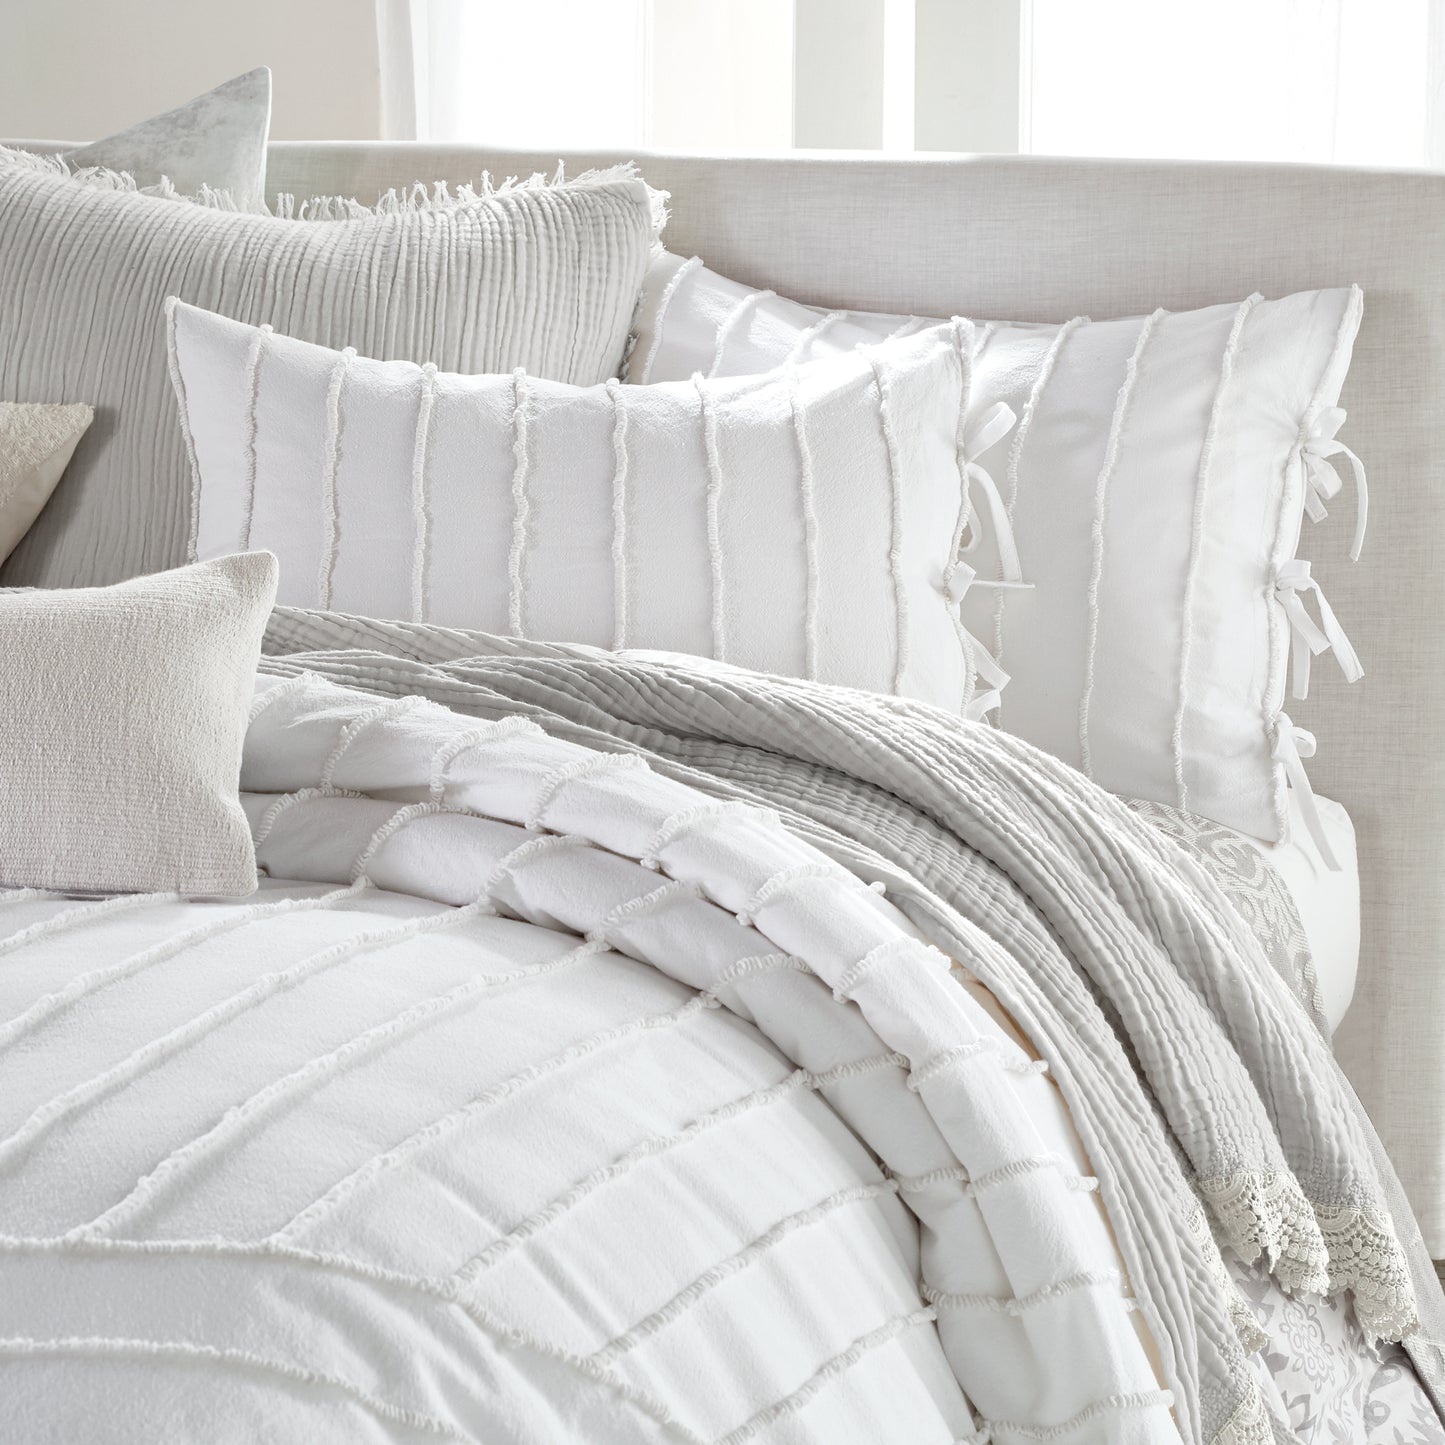 Peri Home Linear Loop Comforter Bedding Collection